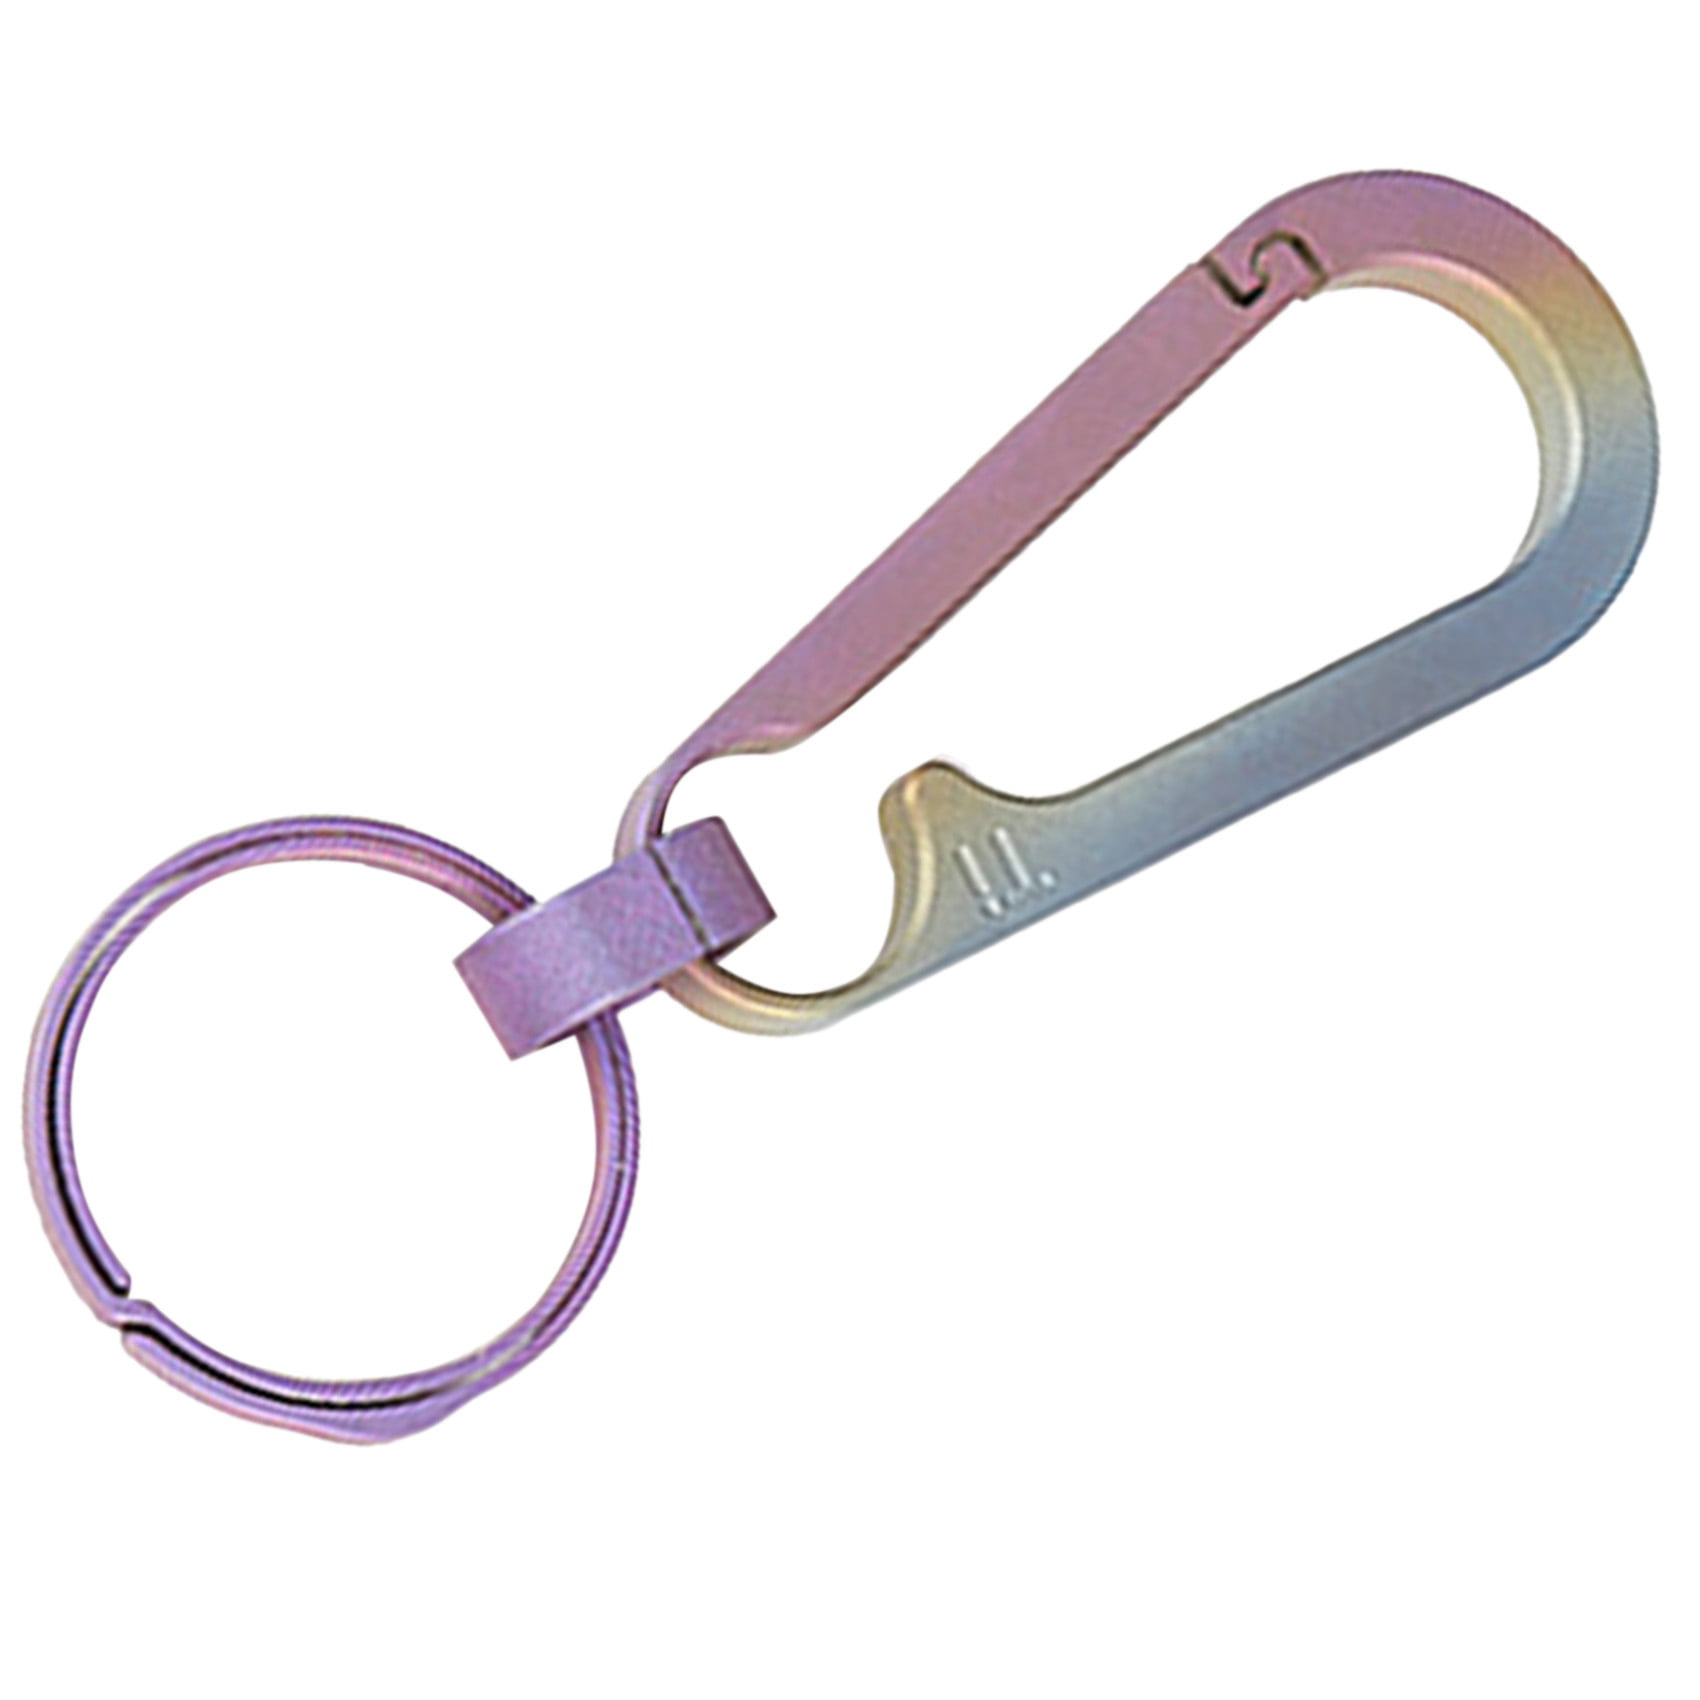 Details about   Titanium Alloy Climbing Carabiner Key Chain Clips Hook Buckle Keychain Tool 